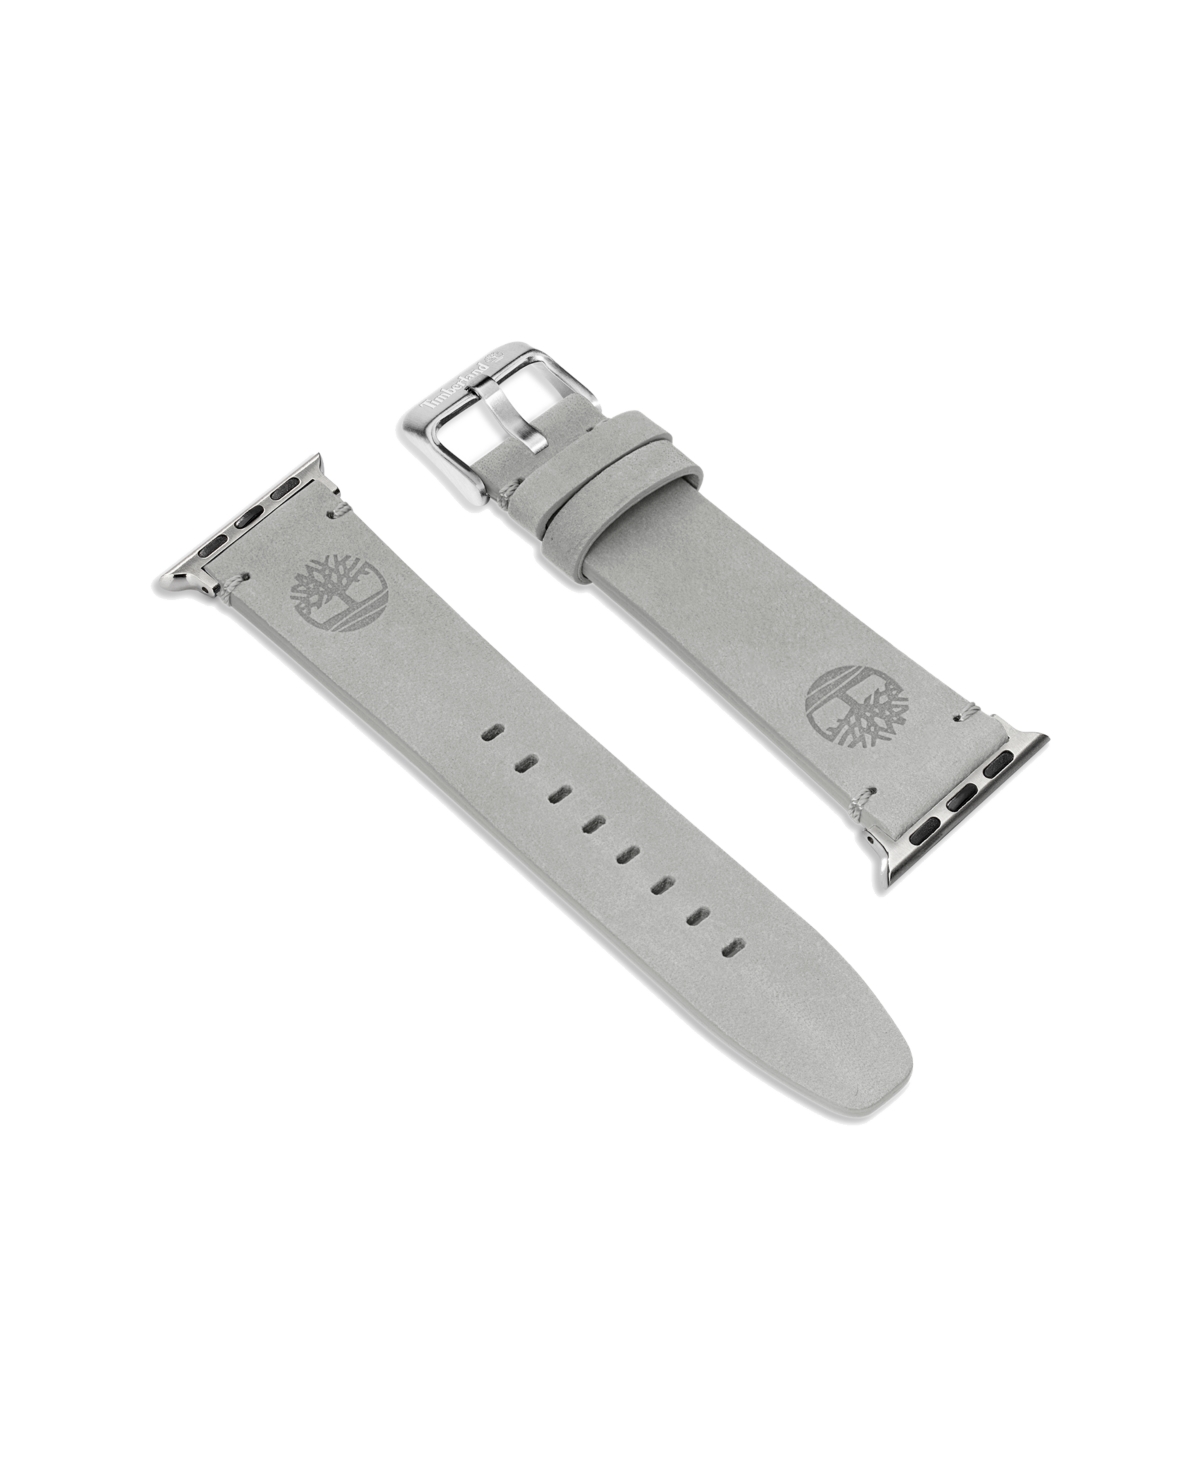 Unisex Ashby Gray Genuine Leather Universal Smart Watch Strap 22mm - Gray